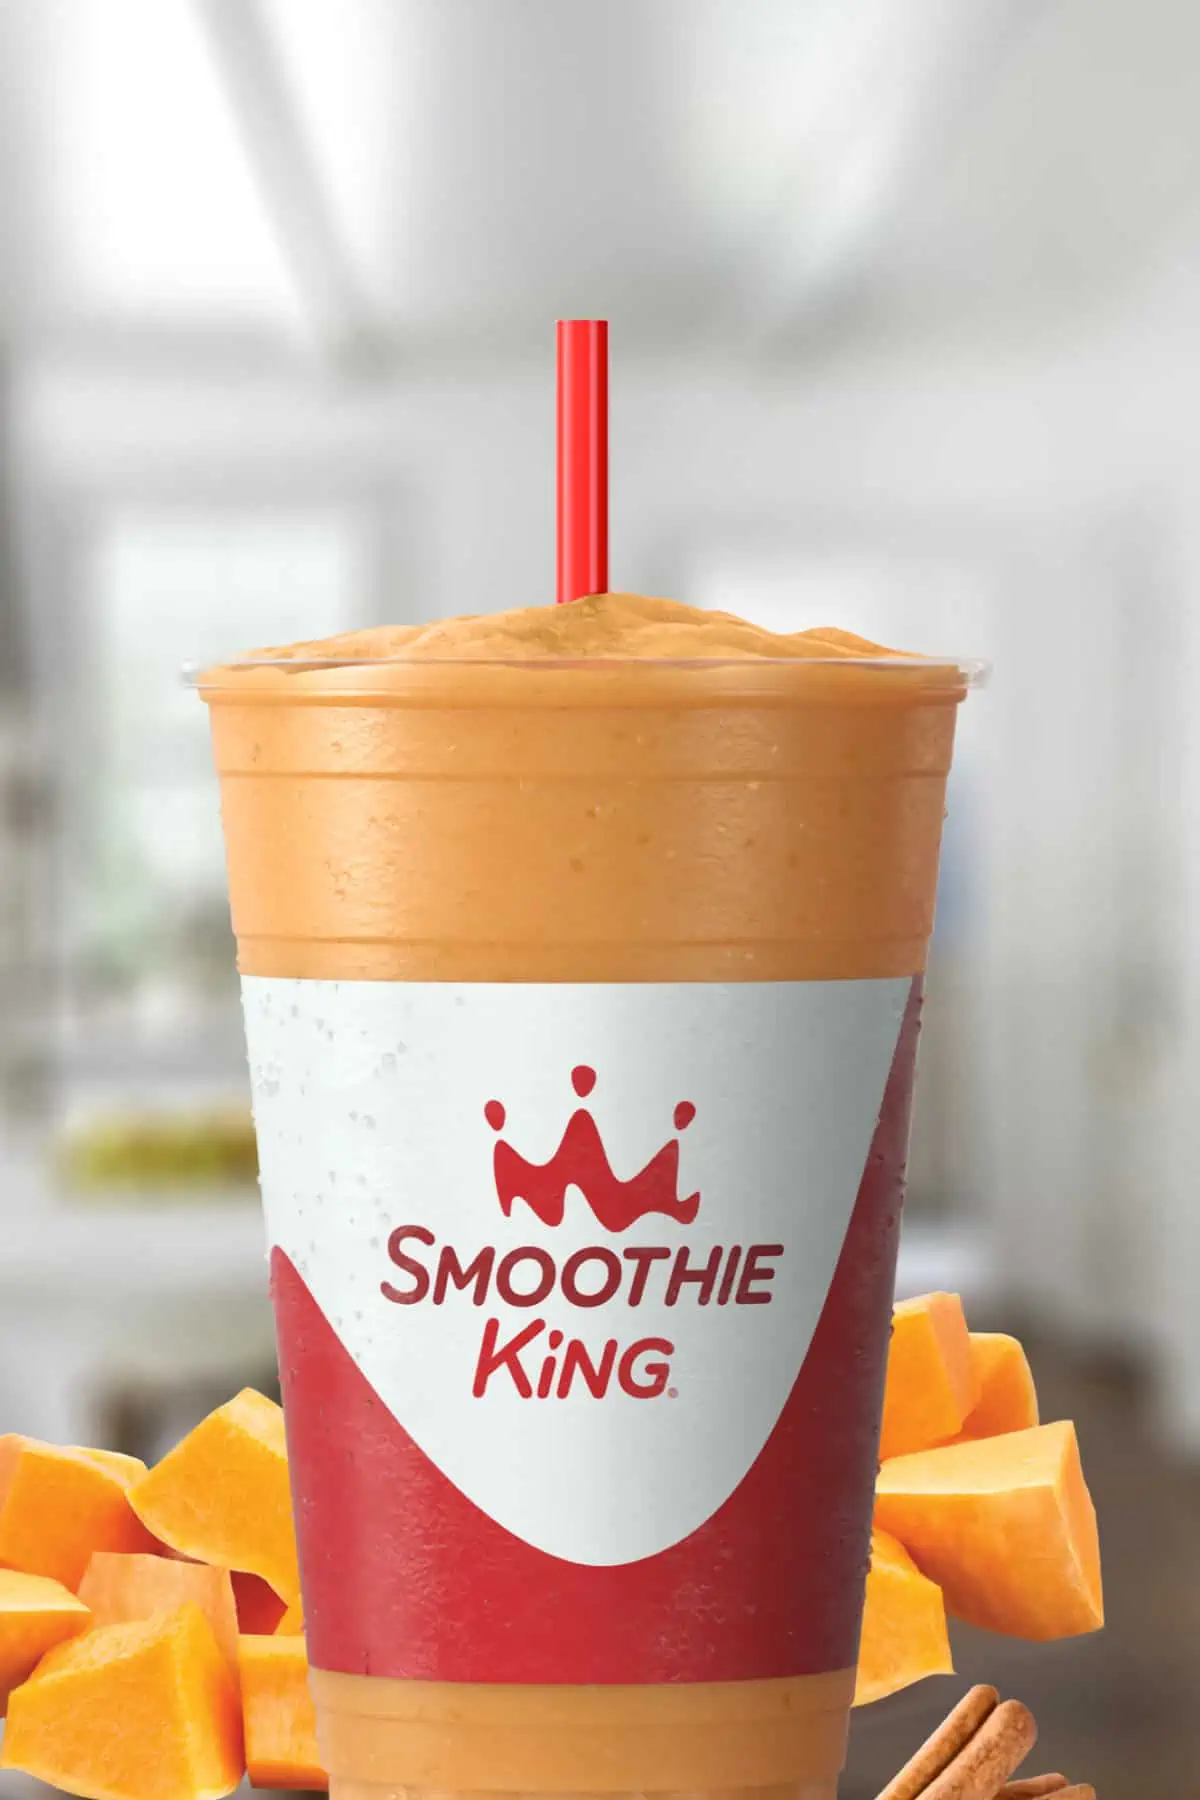 Smoothie King Pumpkin D-Lite smoothie in a glass, on my kitchen counter, surrounded by fresh fruit.